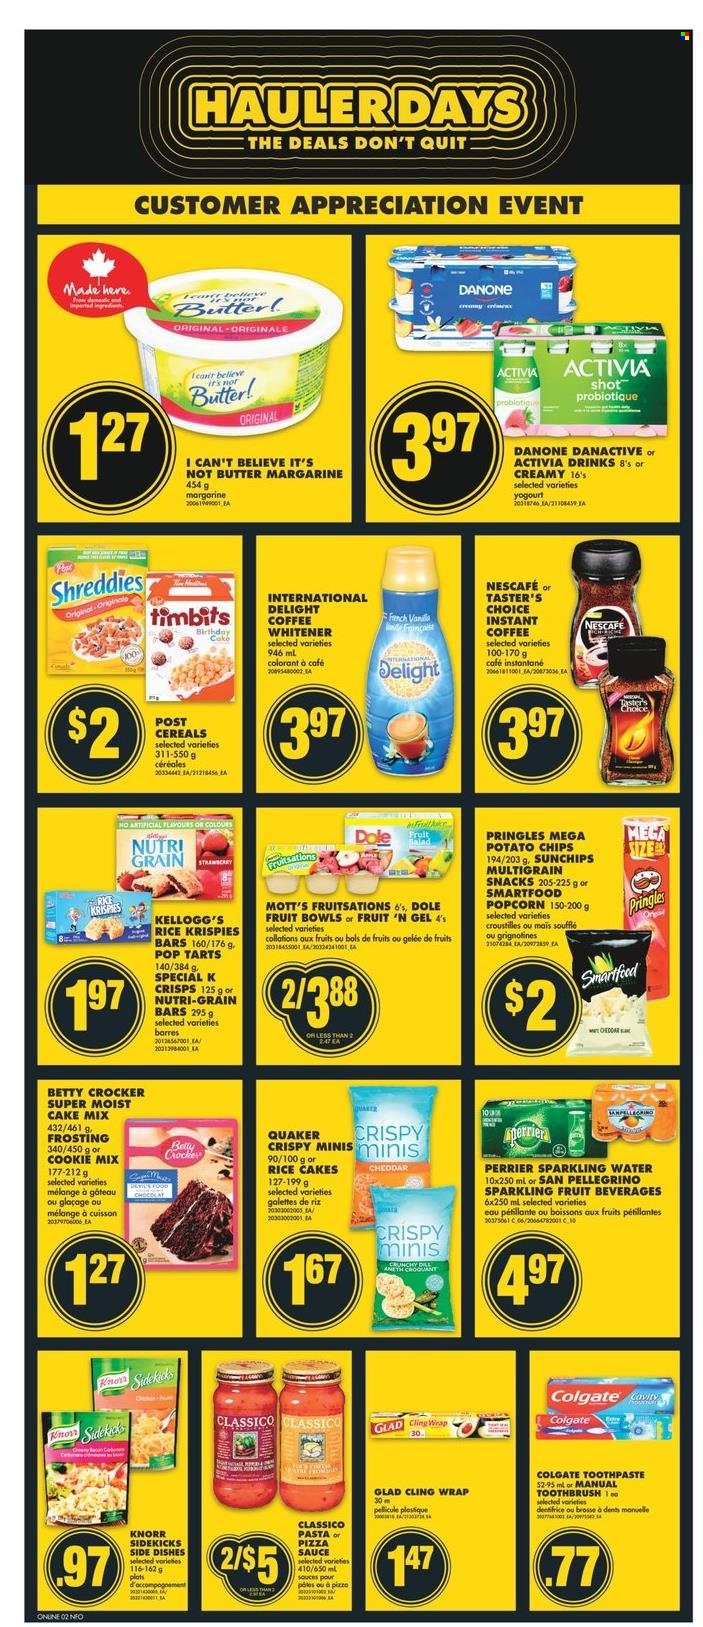 thumbnail - No Frills Flyer - October 28, 2021 - November 03, 2021 - Sales products - cake mix, Dole, Mott's, sauce, Quaker, Activia, butter, margarine, I Can't Believe It's Not Butter, snack, Kellogg's, Pop-Tarts, Nutri-Grain bars, potato chips, Pringles, Smartfood, popcorn, cereals, Rice Krispies, Nutri-Grain, Classico, Perrier, sparkling water, San Pellegrino, instant coffee, toothpaste, Knorr, Danone, Colgate, chips, Nescafé. Page 7.